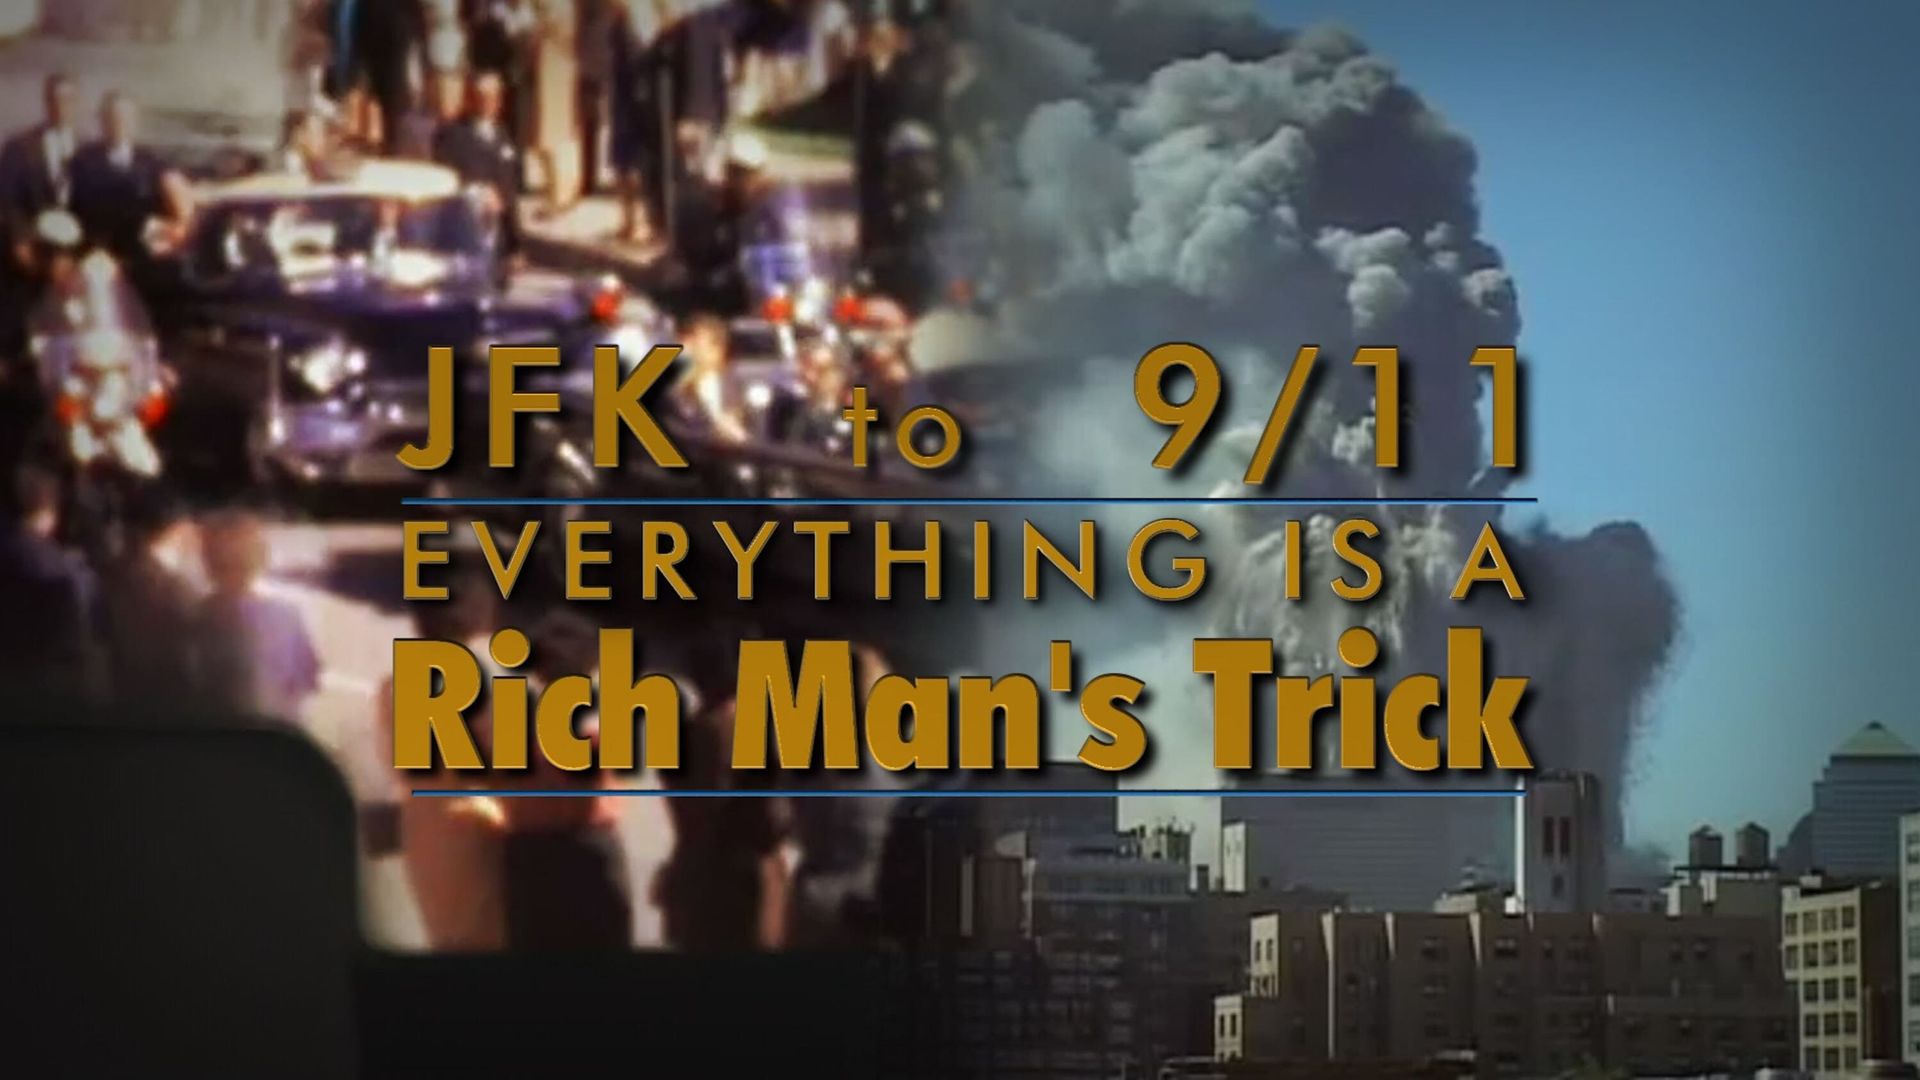 JFK to 9/11: Everything Is a Rich Man's Trick background